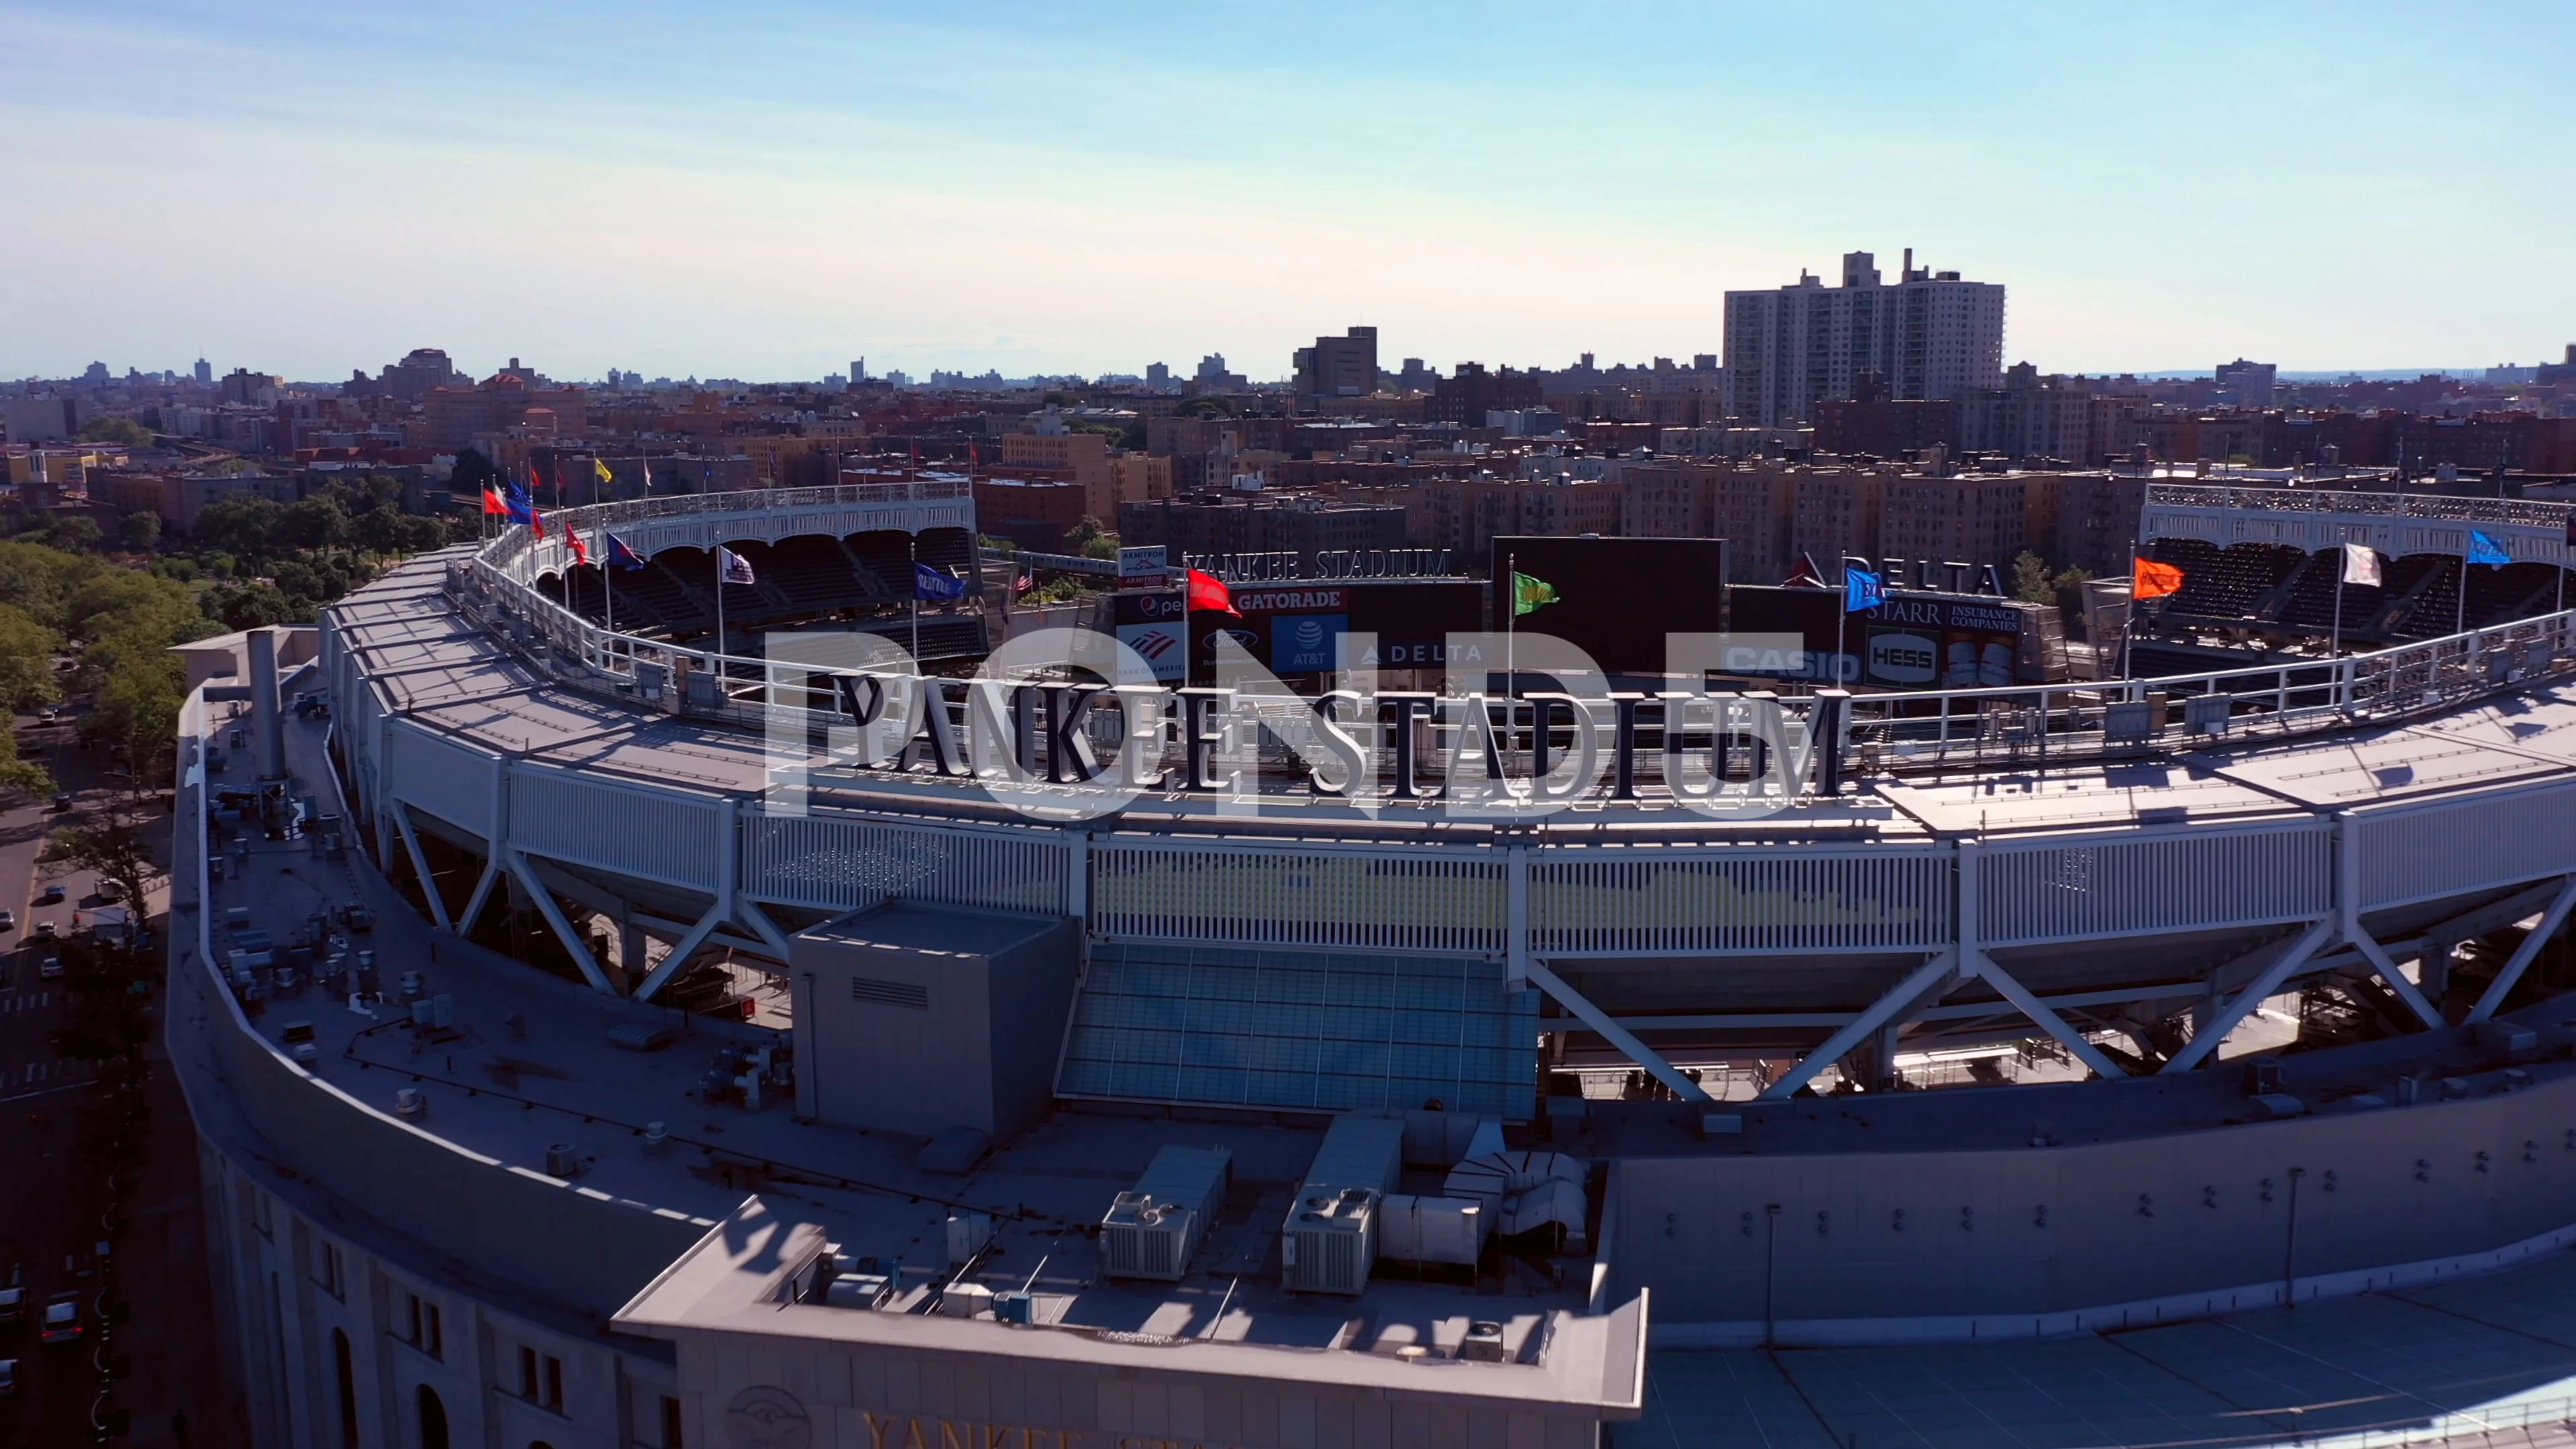 New Drone Footage Gives Unique View of New York's Yankee Stadium